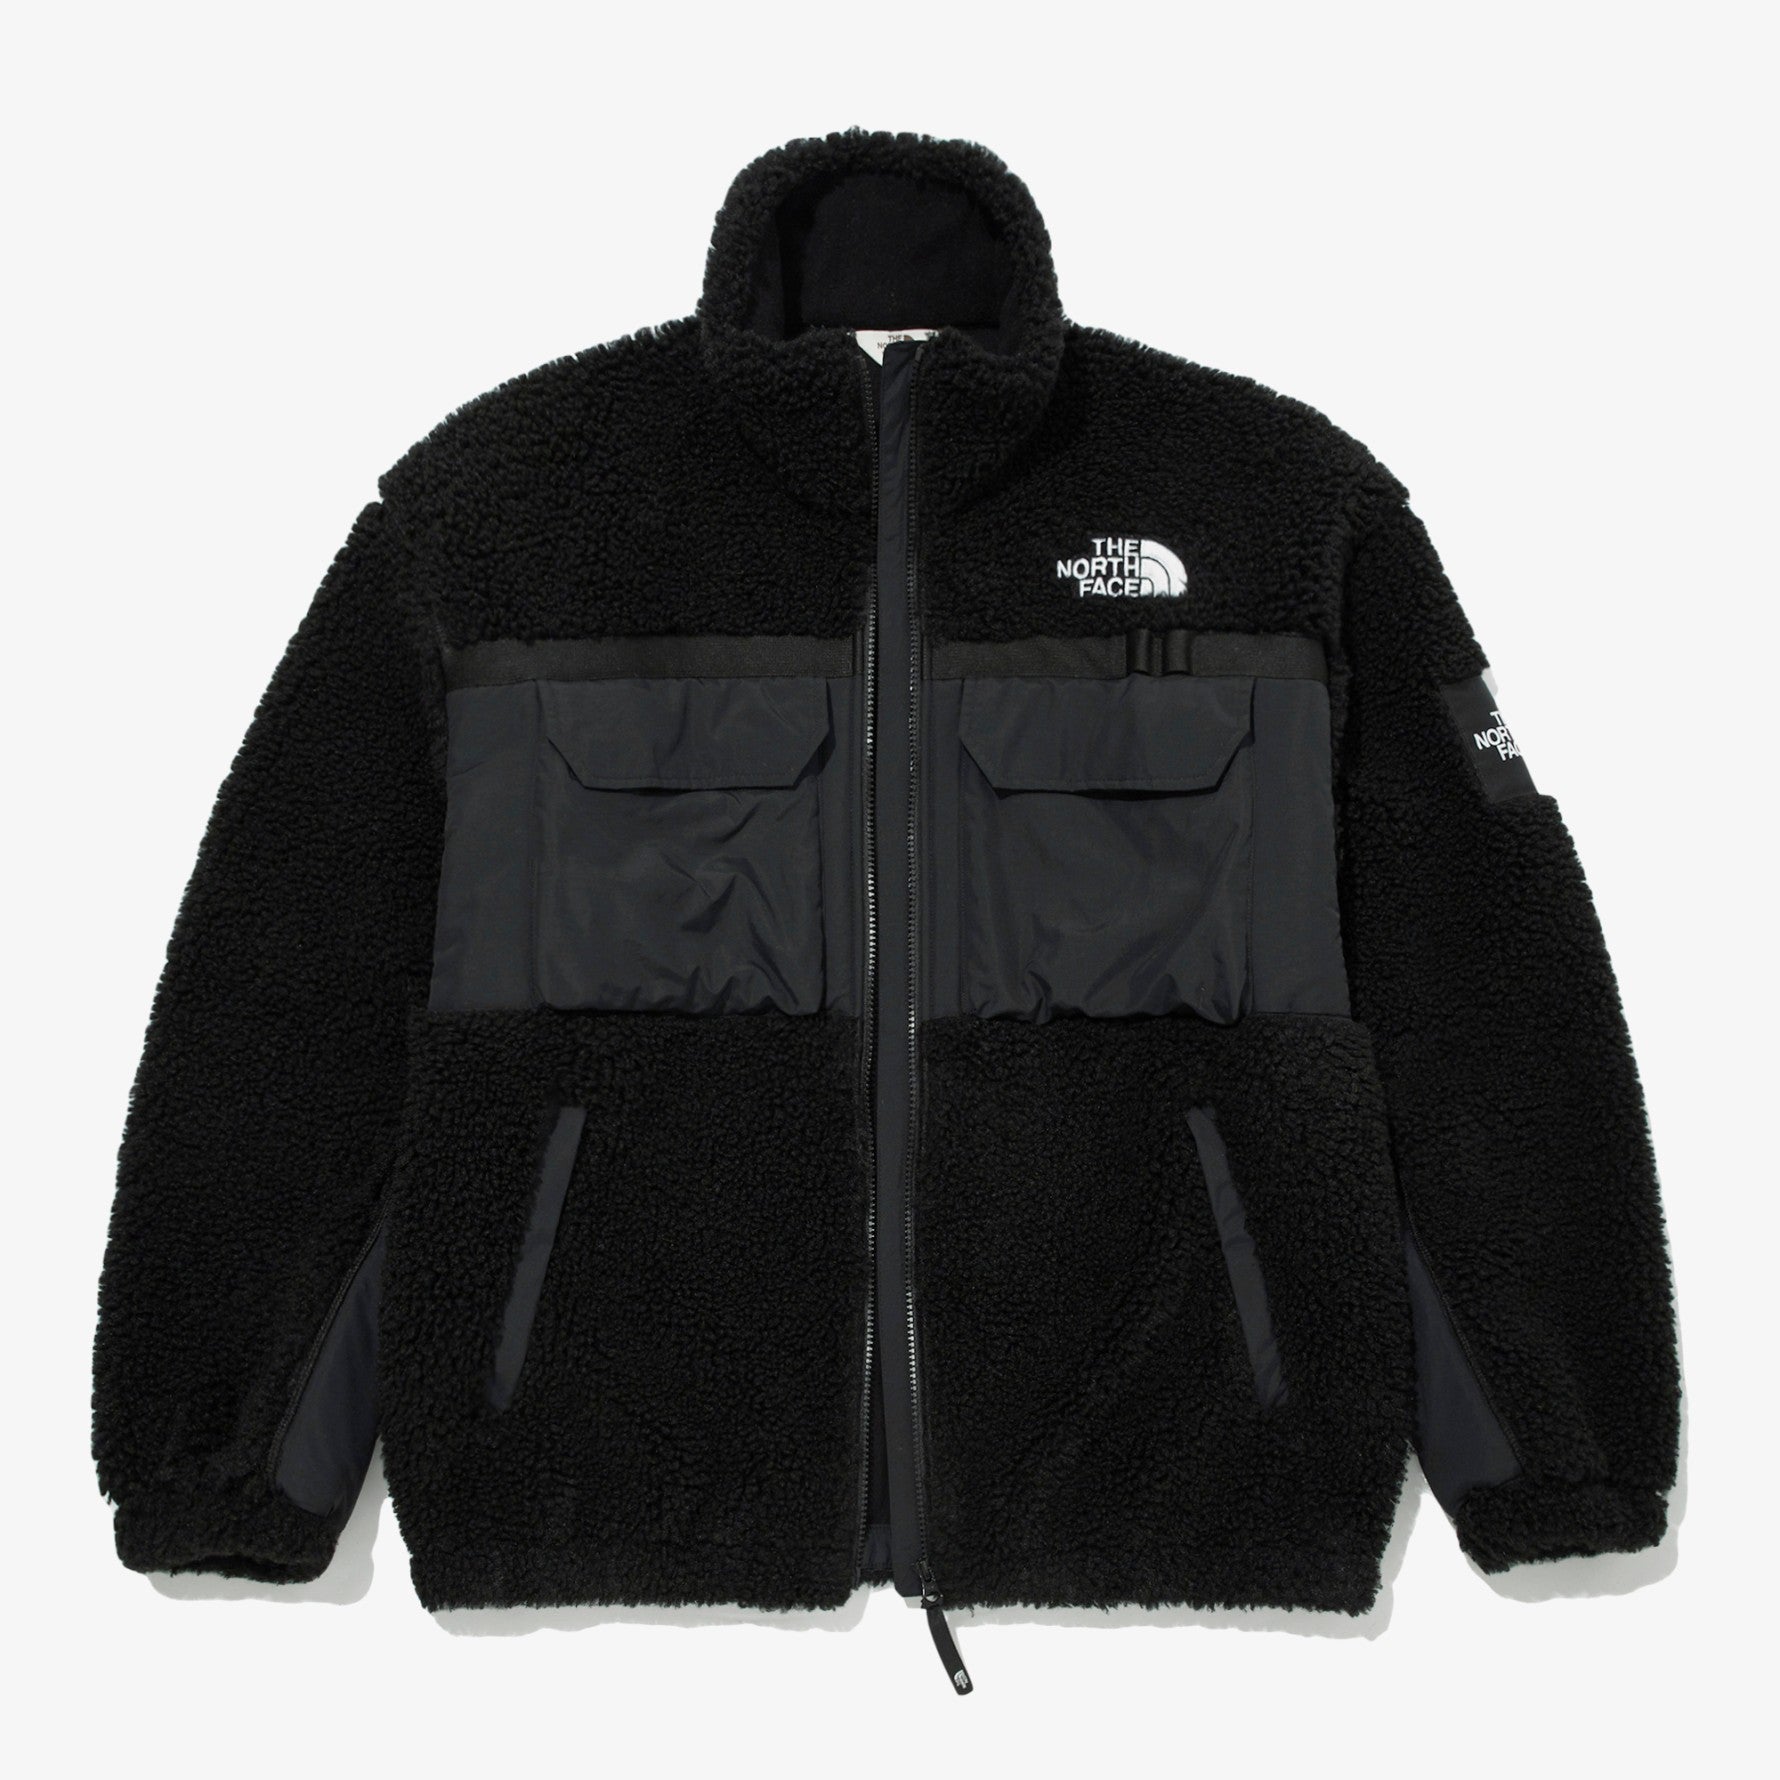 ★THE NORTH FACE★大人気UTILITY FLEECE JACKET★今日注文なら、無料配送サービスがあります。